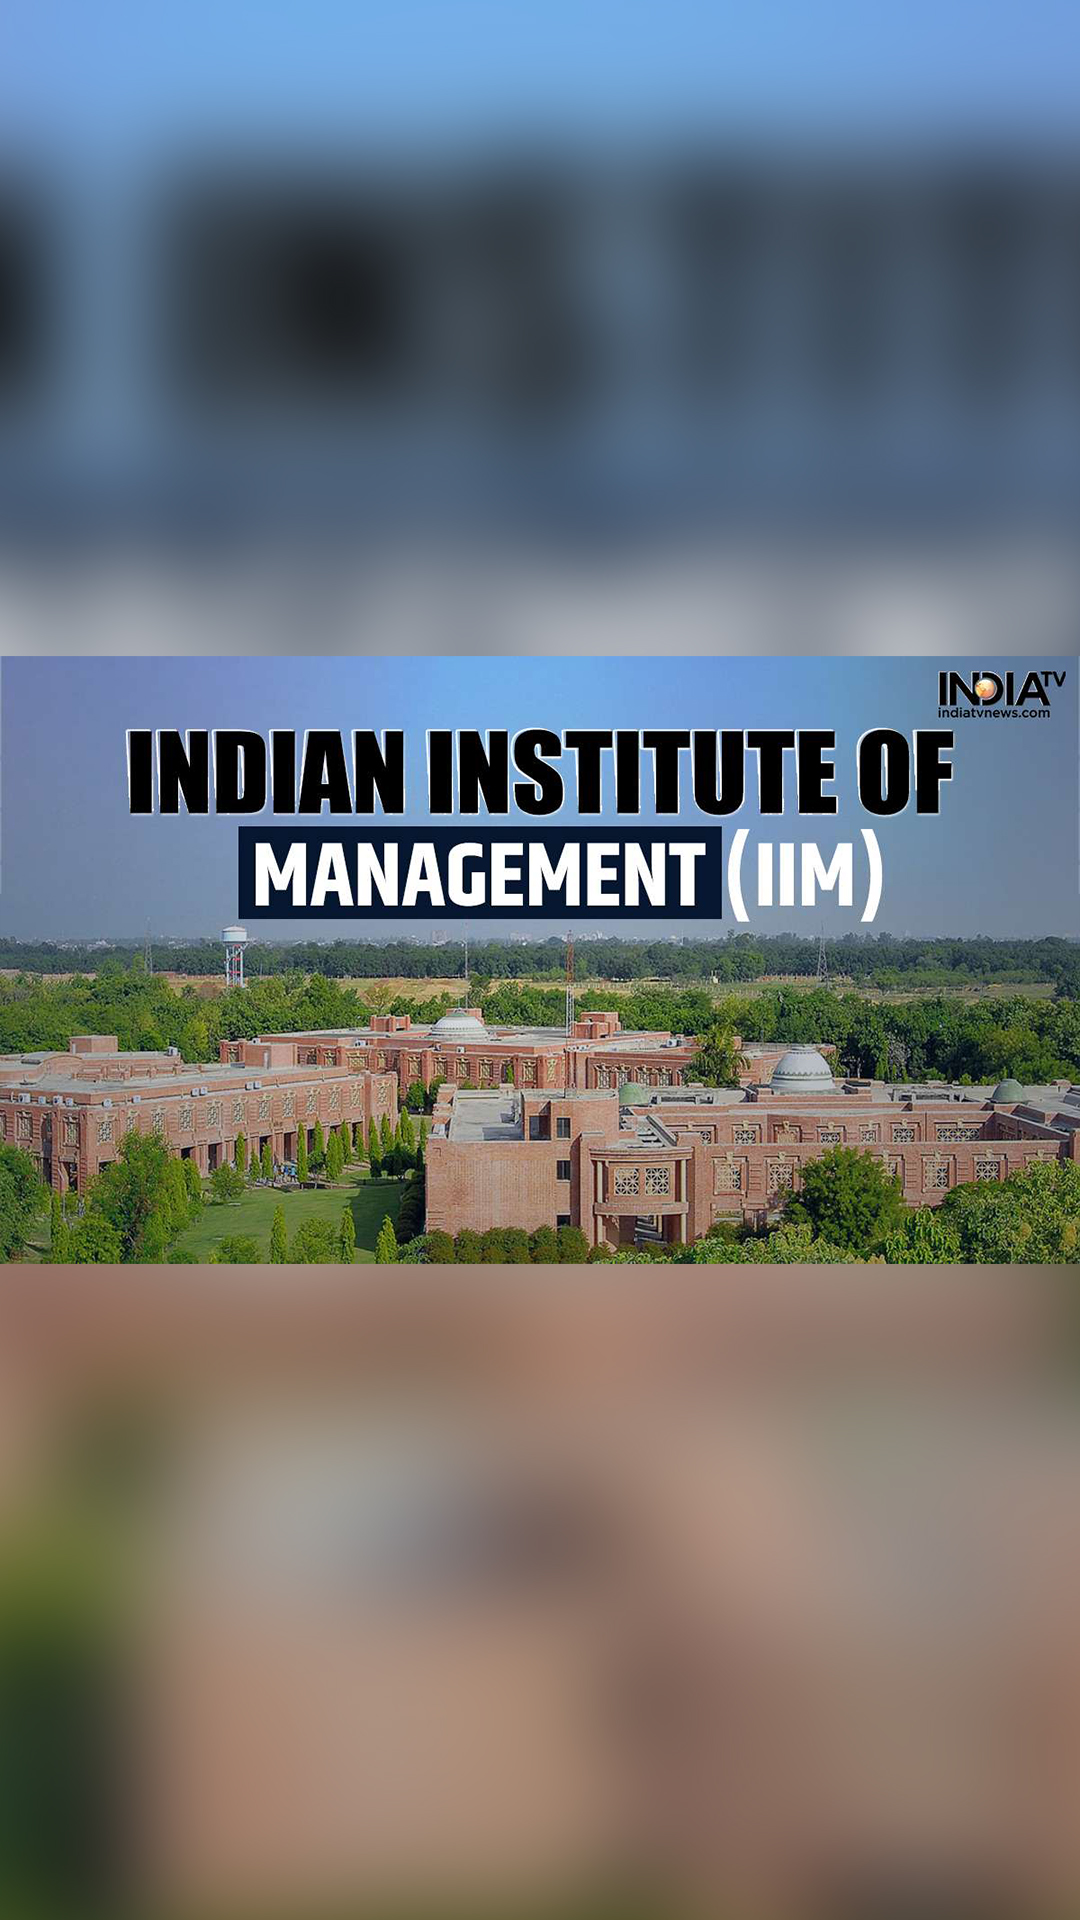 Journey to IIMs: Decoding the Selection Process